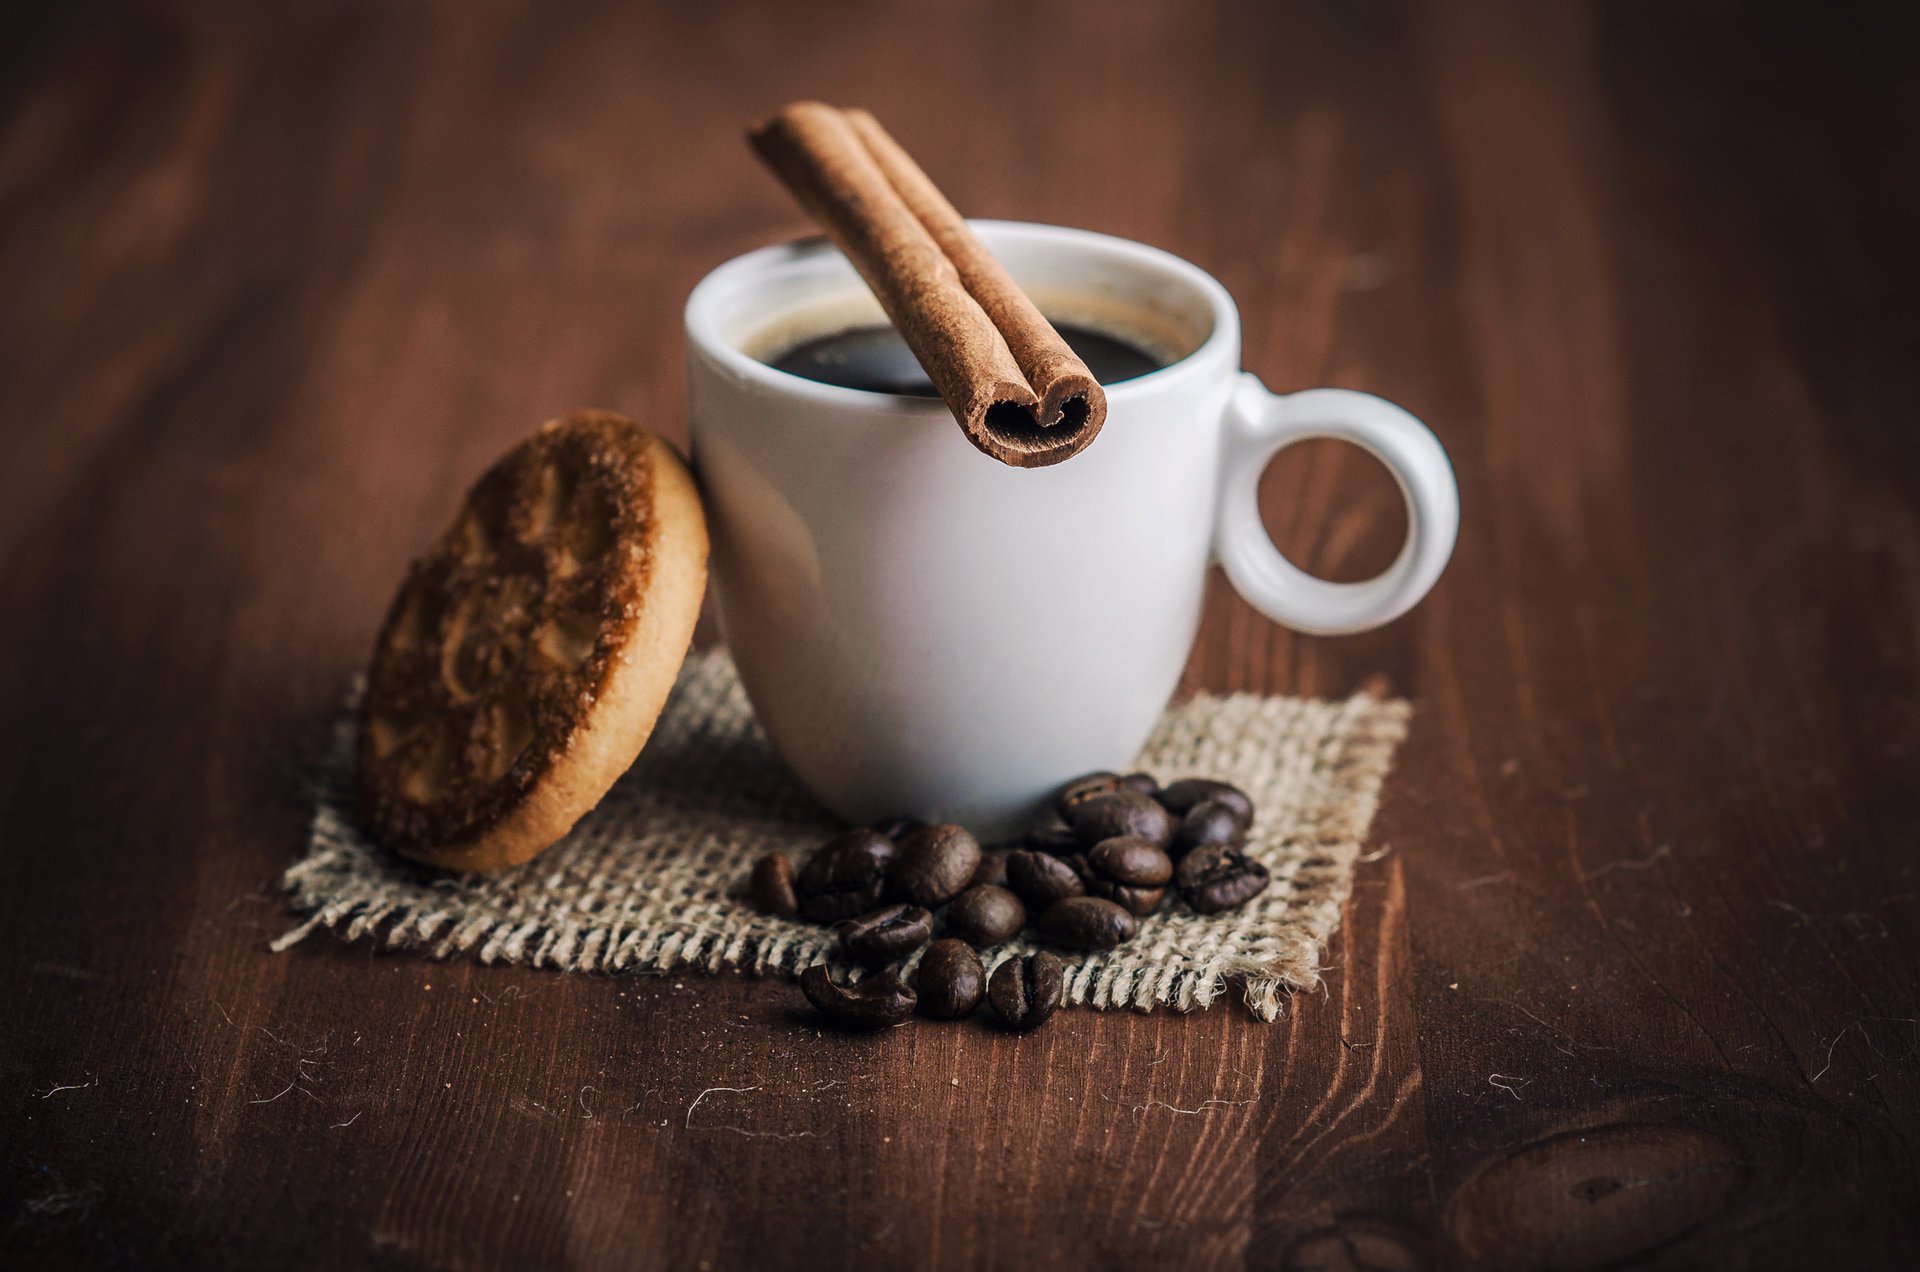 On the wooden table is a white cup with coffee, cinnamon, liver and coffee beans